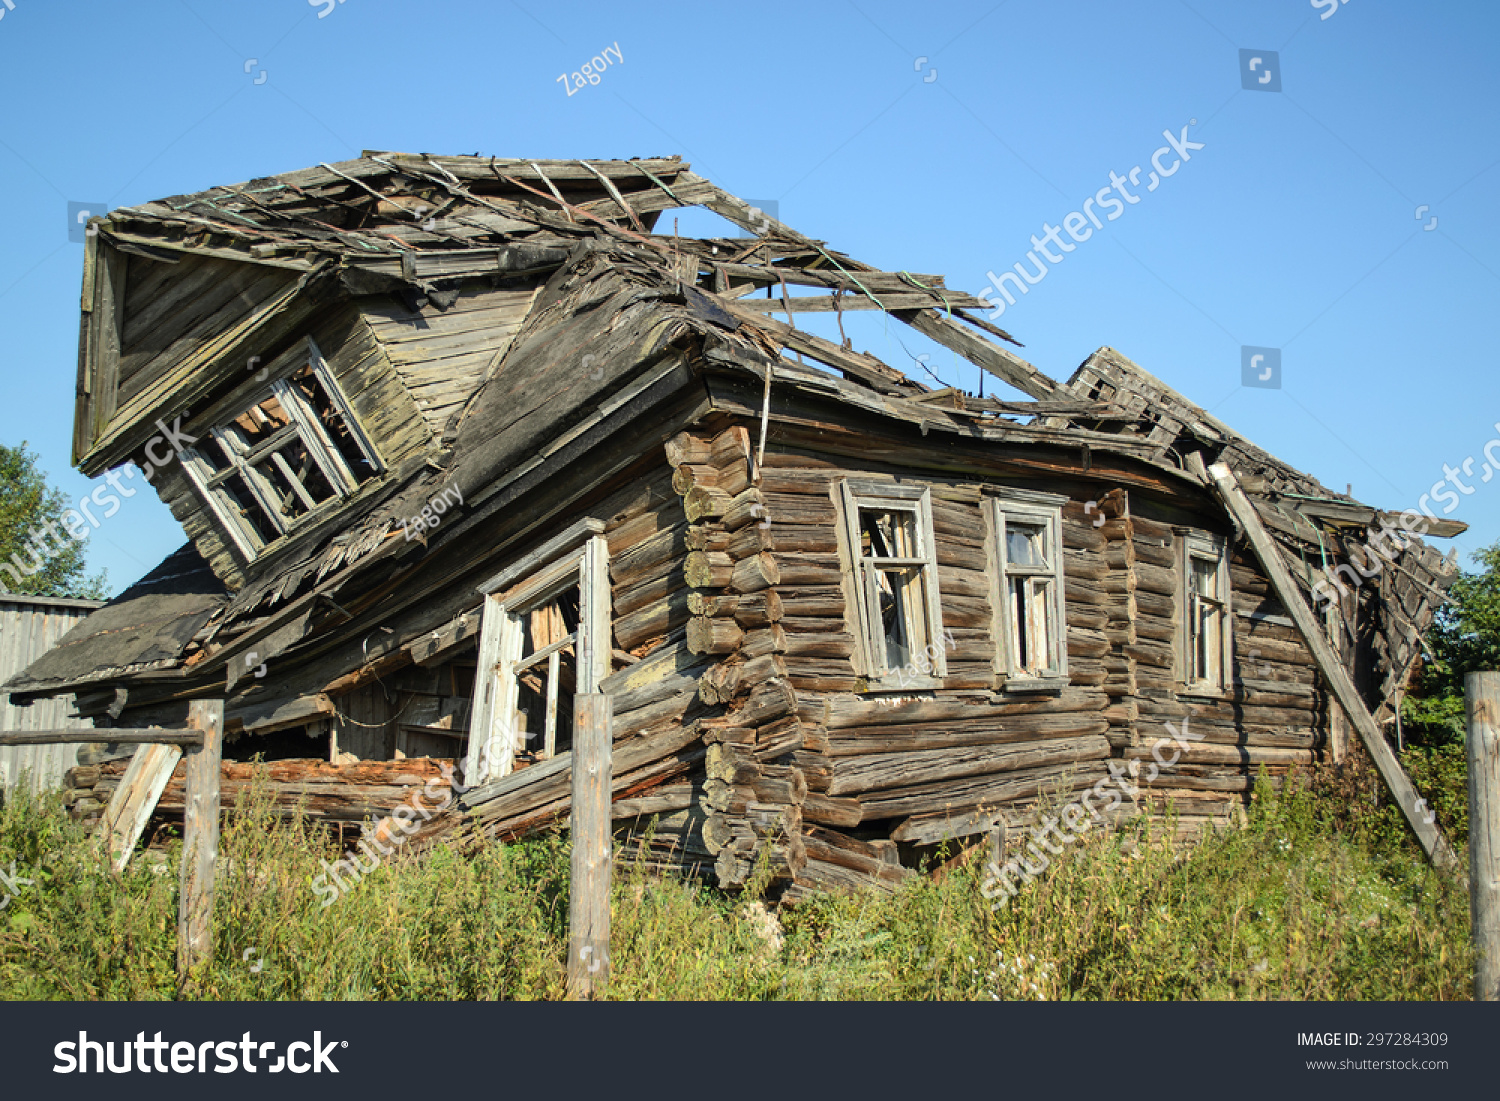 Old Abandoned Broken House Russian Village Stock Photo (Edit Now) 297284309